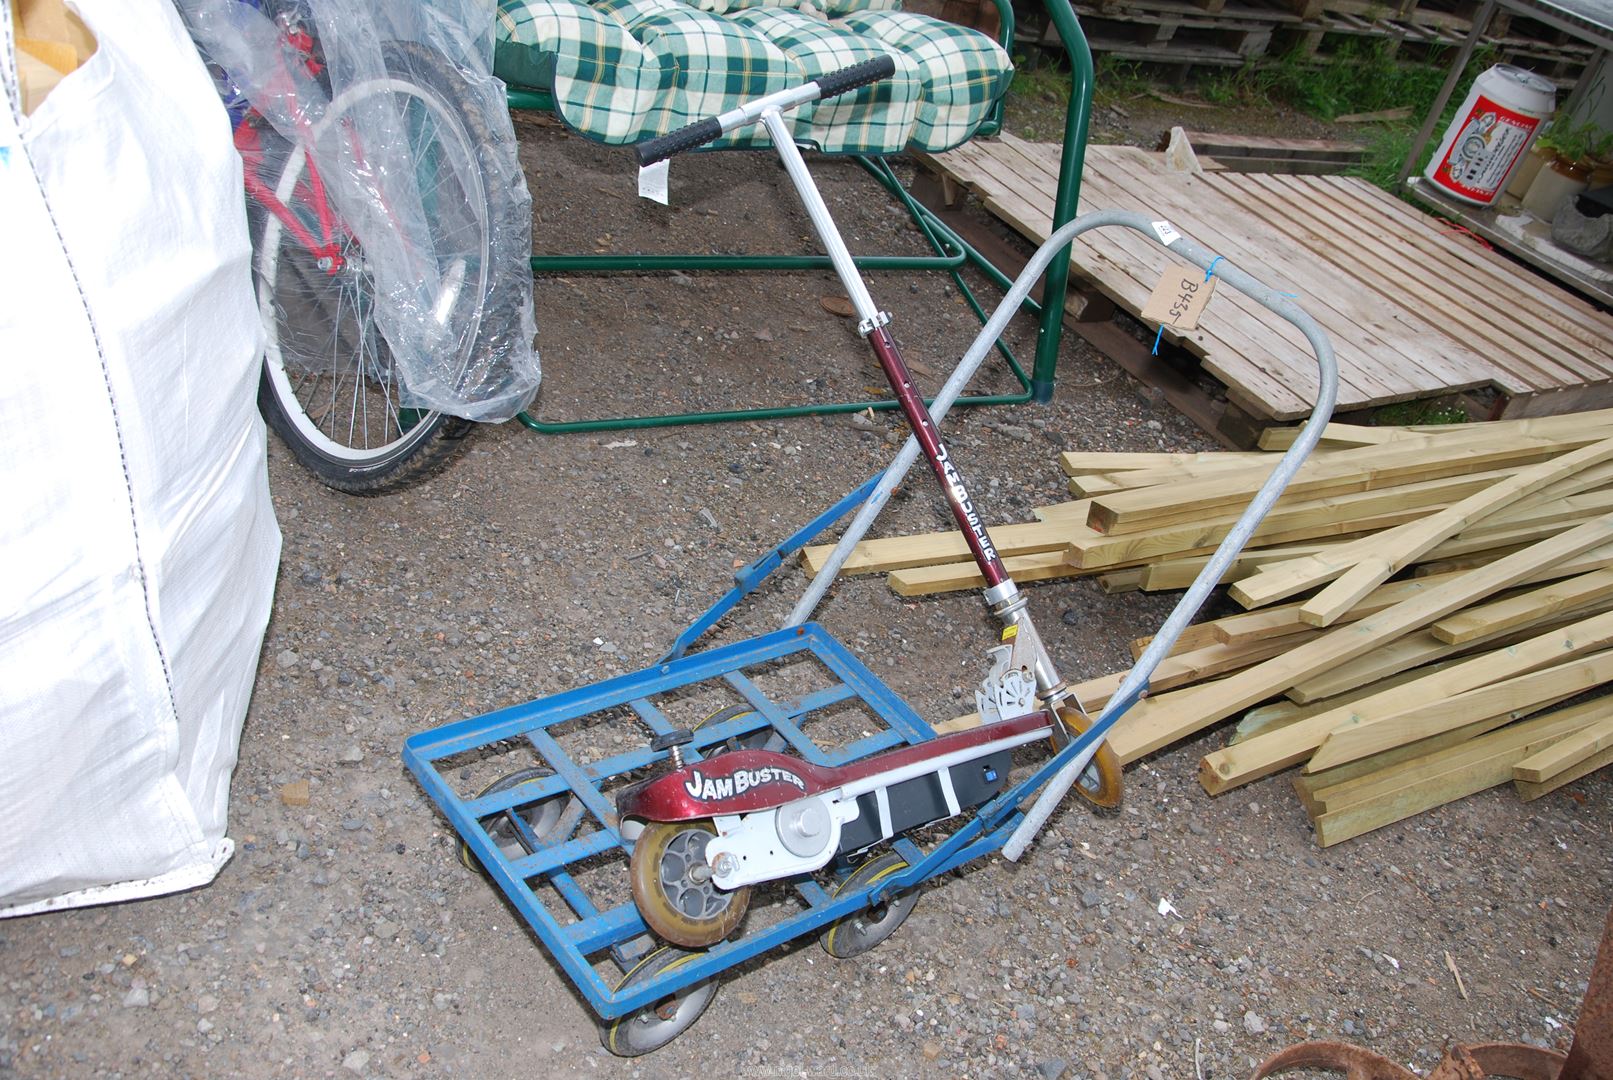 A four wheel hand trolley and electric 'jam buster' scooter.